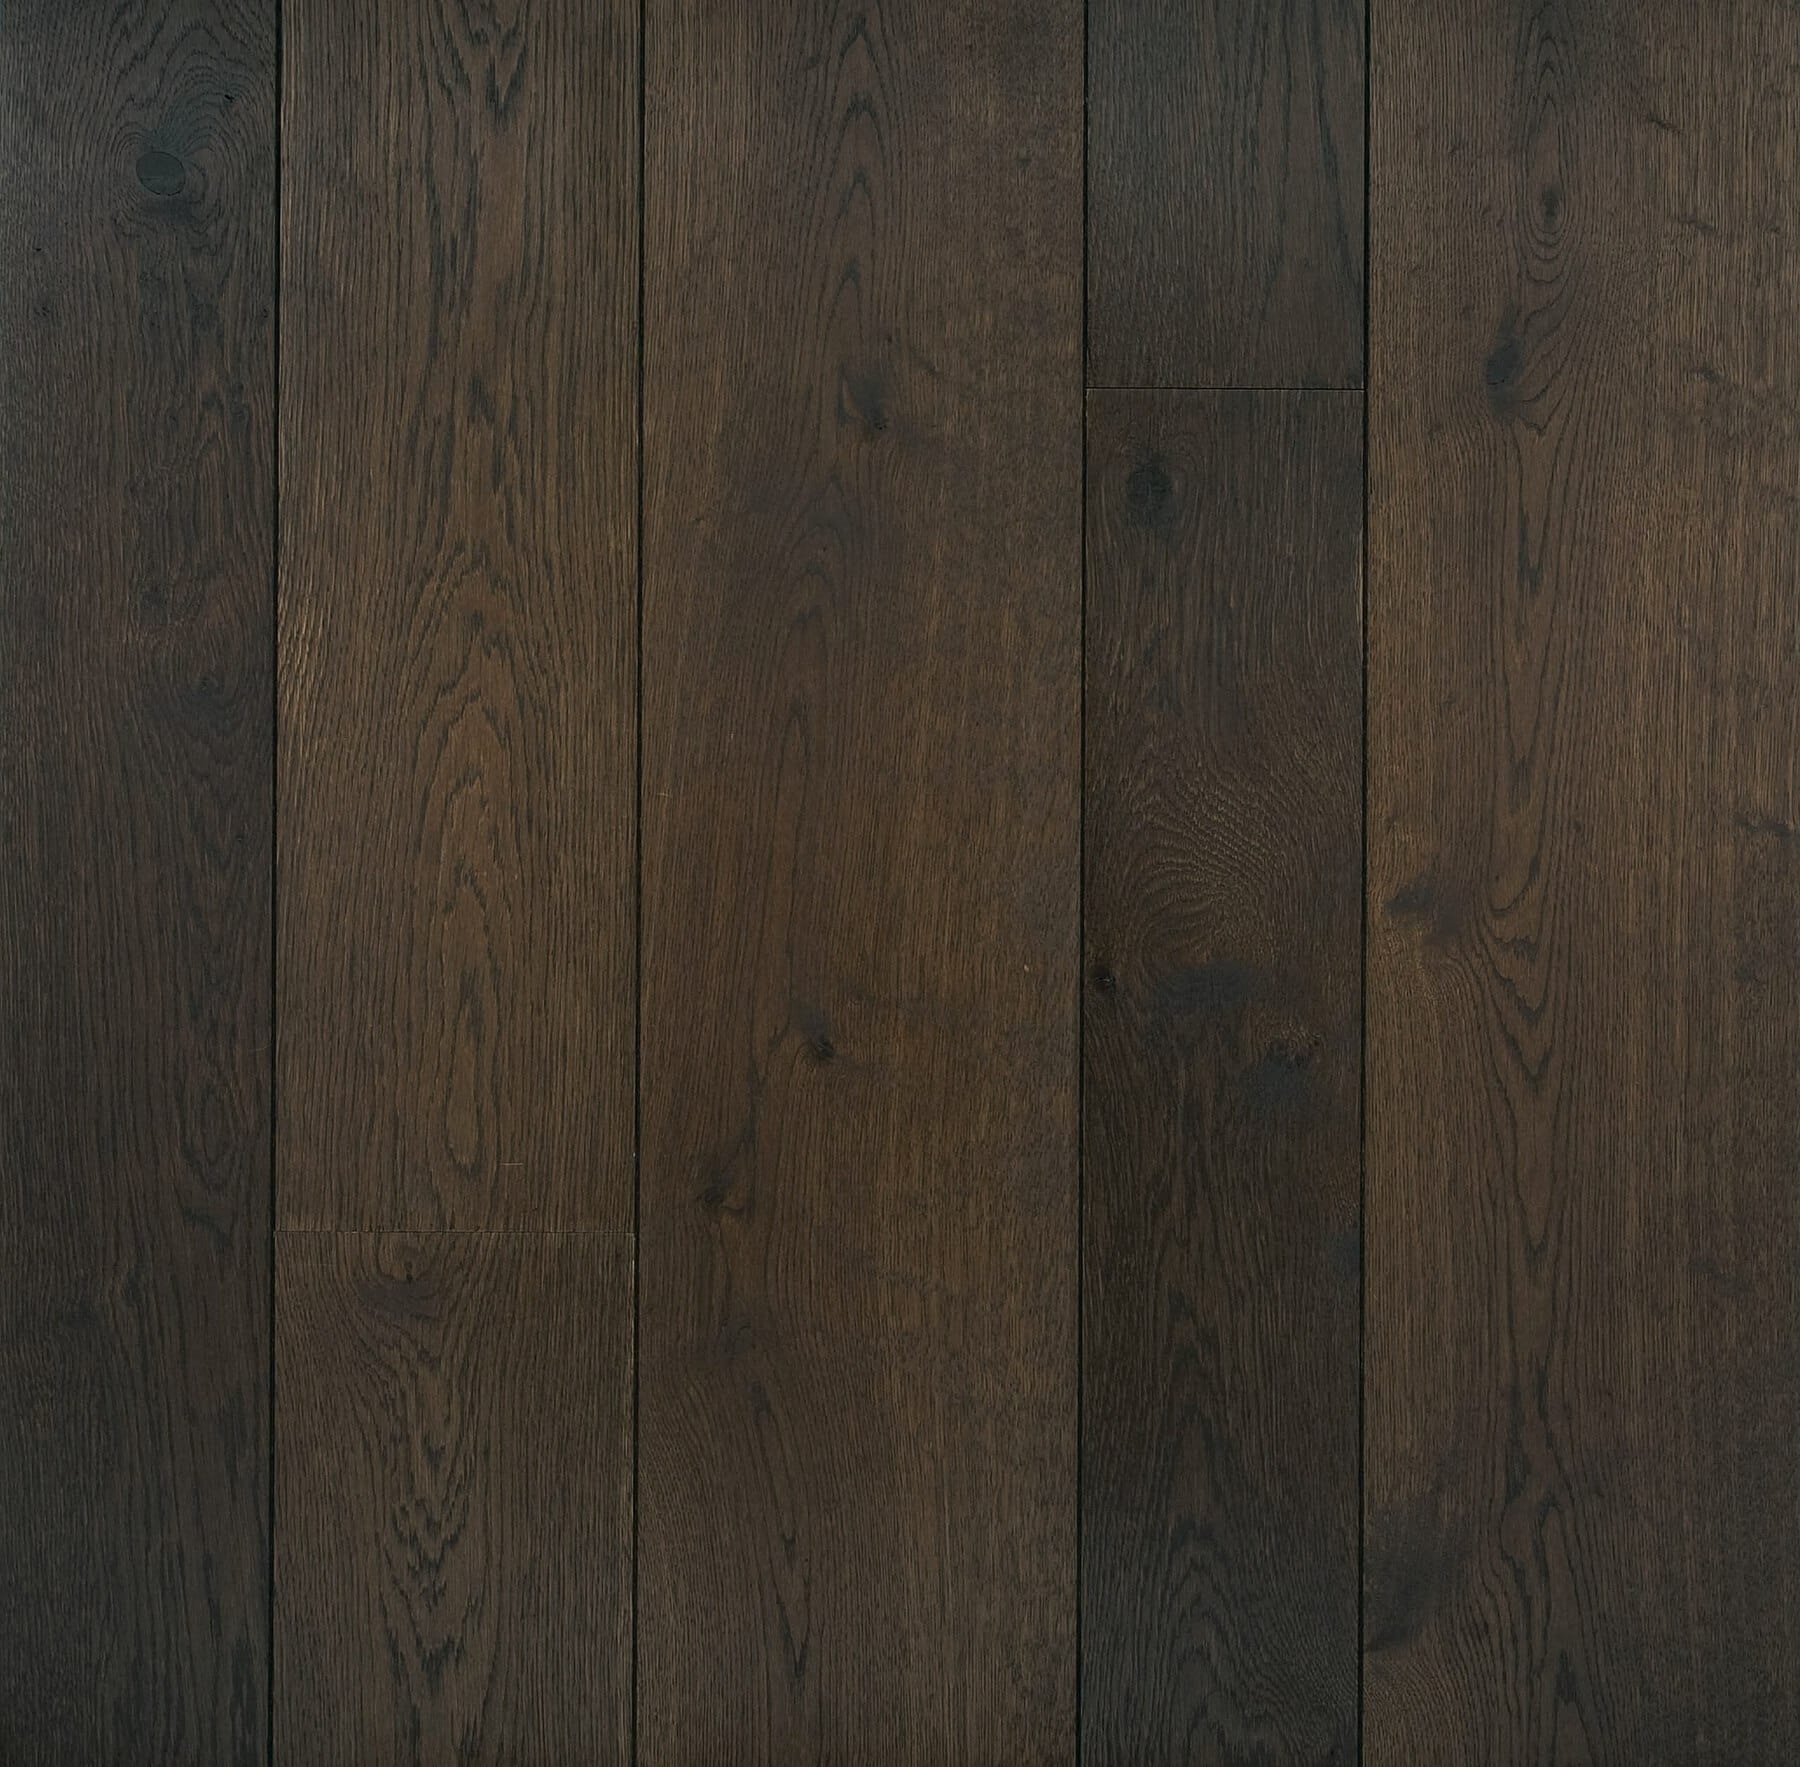 Dark brown engineered oak wood flooring classic grade in three widths 140mm 180mm 220mm wide fumed and finished with natural dark oil in Surrey